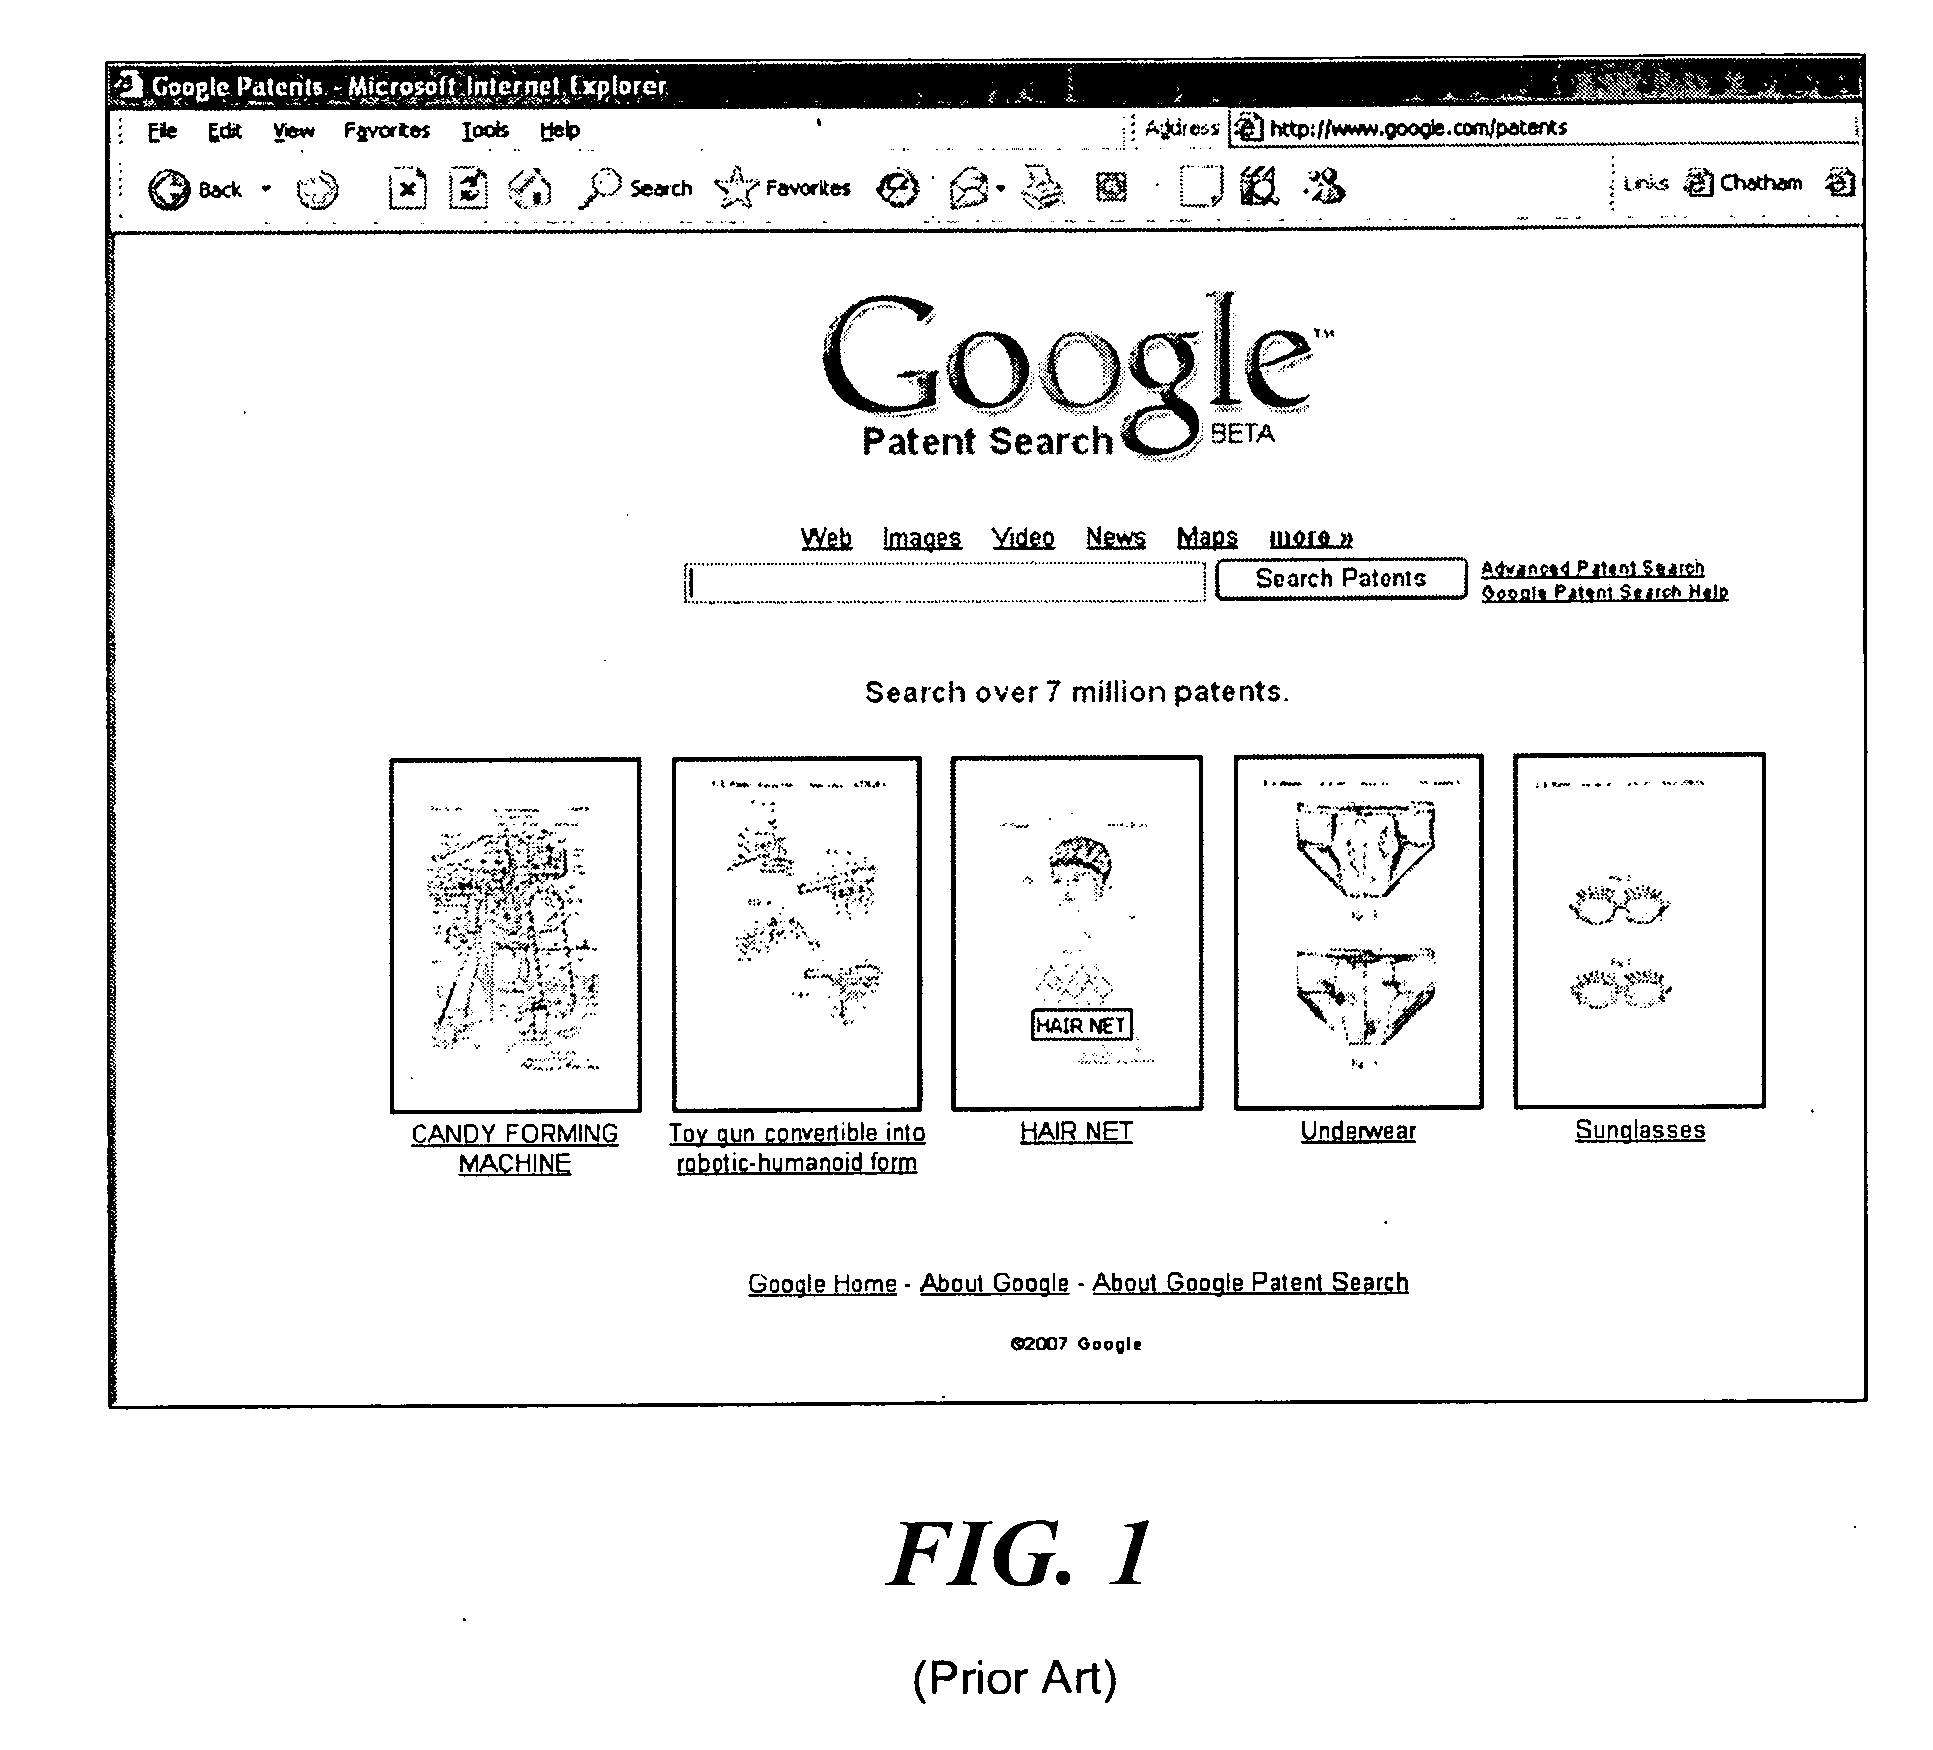 Apparatus and Method for Performing Analyses on Data Derived from a Web-Based Search Engine